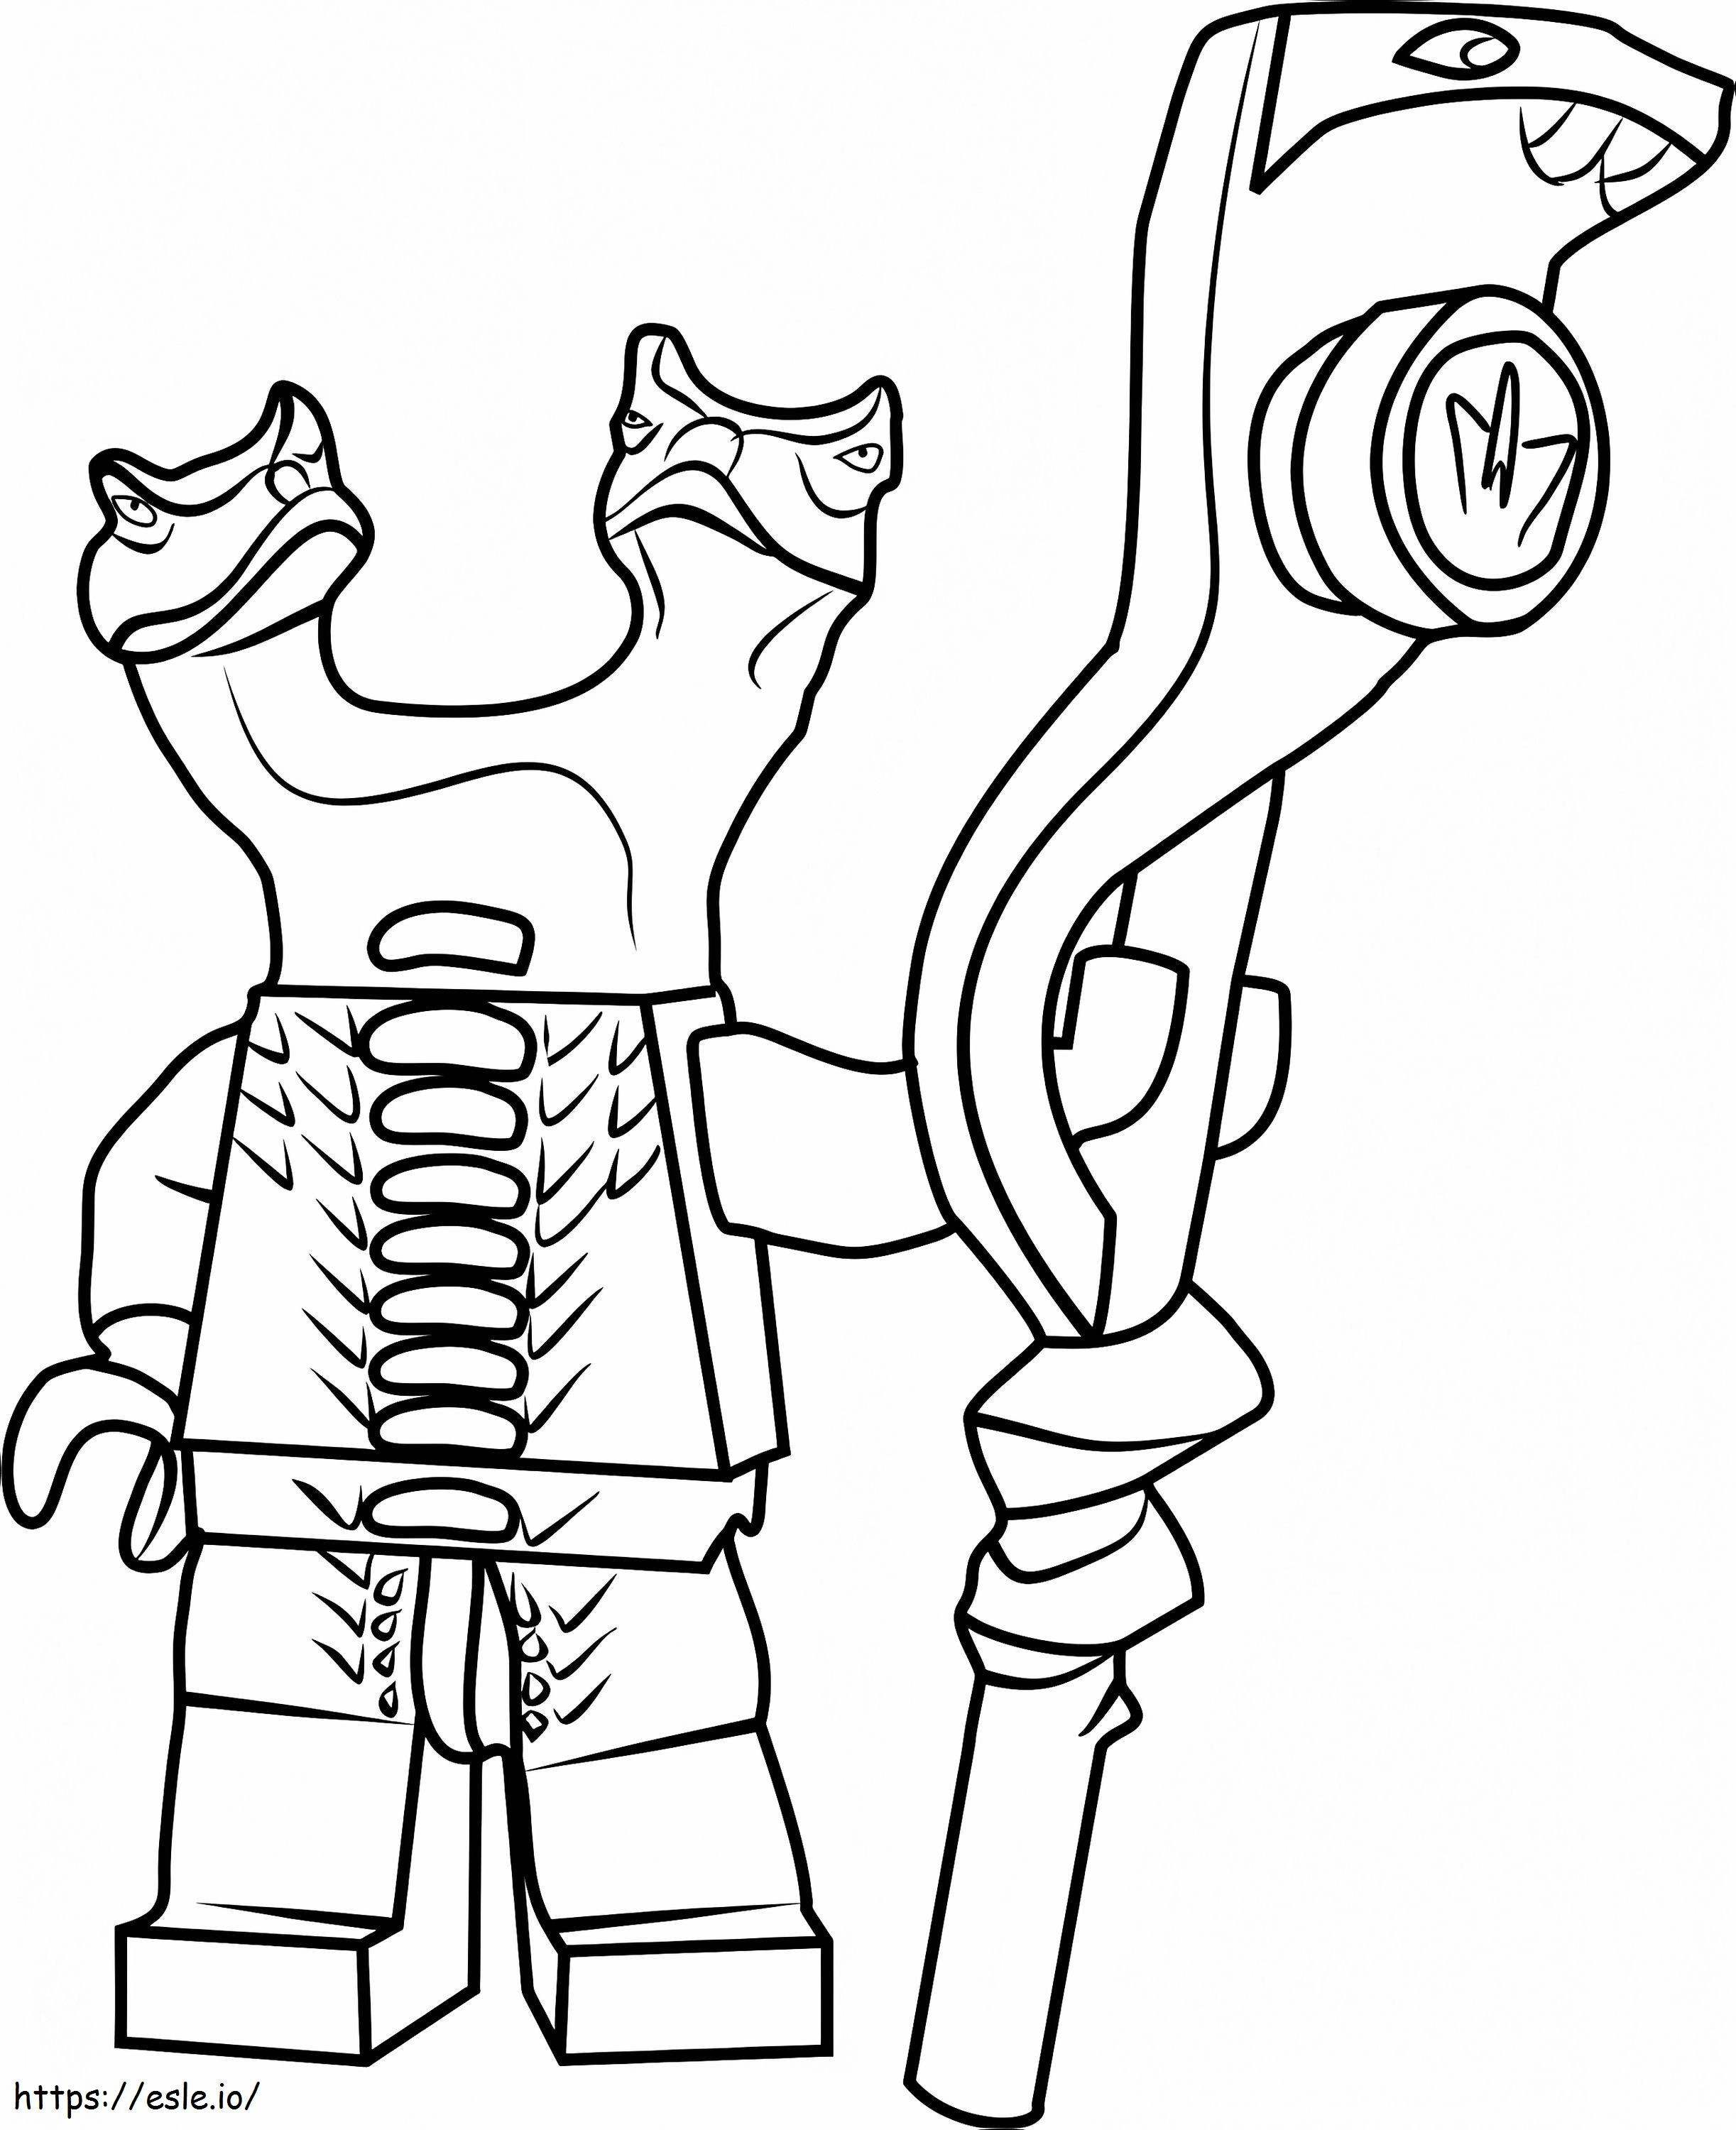 1529724509 4 coloring page